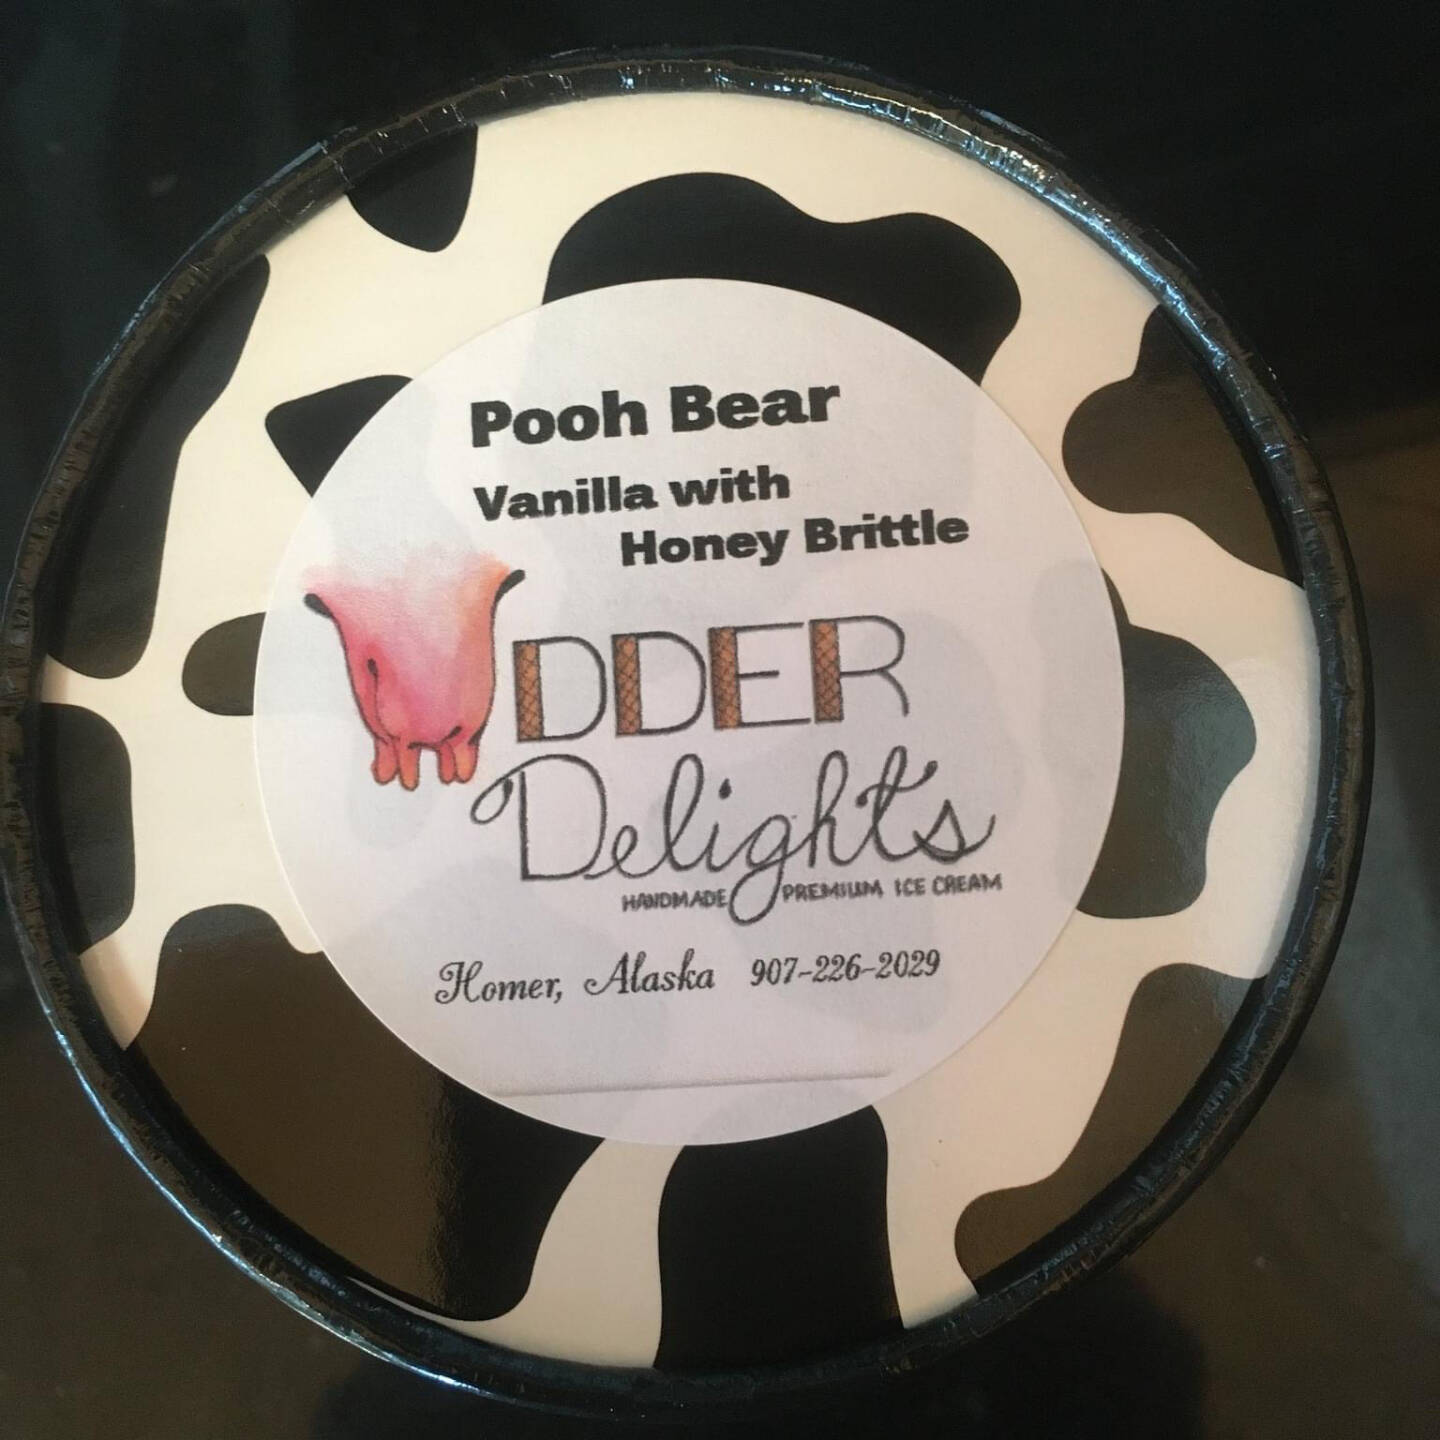 Udder Delights’ Pooh Bear ice cream is one of numerous flavors availale at local stores and at the Homer Farmers Market. Photo provided by Udder Delights